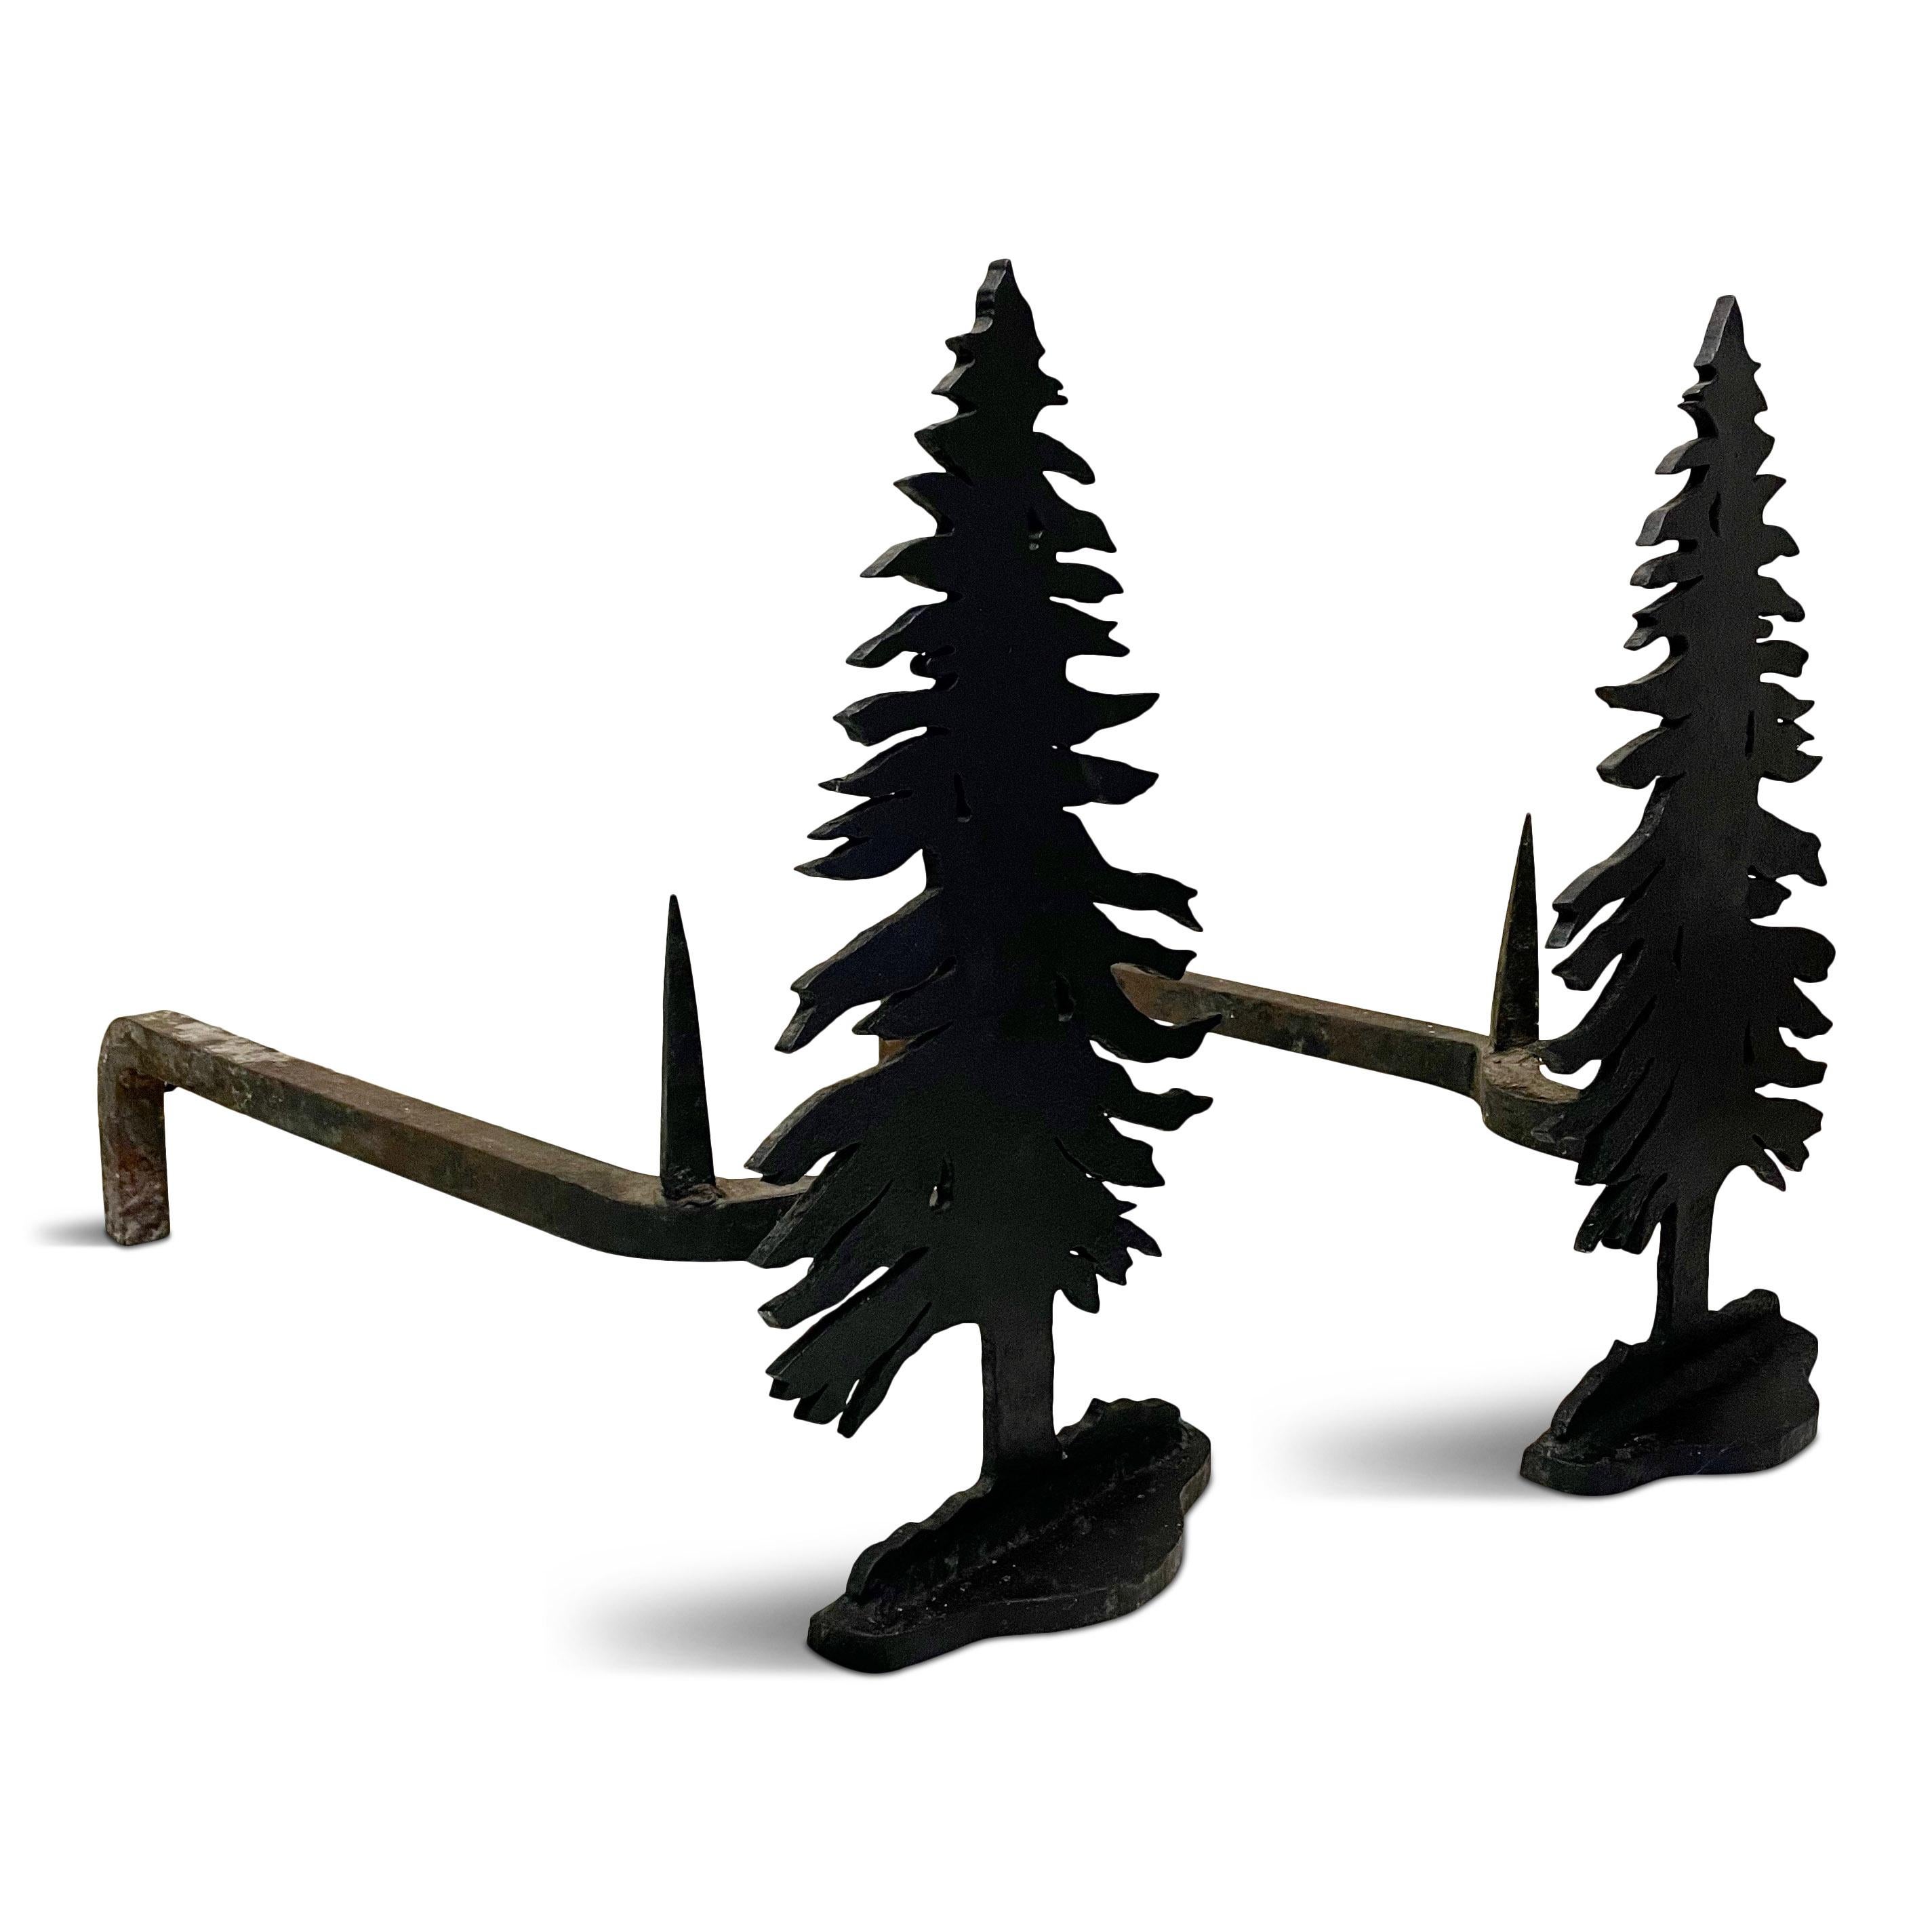 Craftsman made andirons in the arts and crafts style which was a reaction to the industrial revolution of the early 20th century. These andiron were hand crafted and would make a great addition to your ski retreat or mountain house.